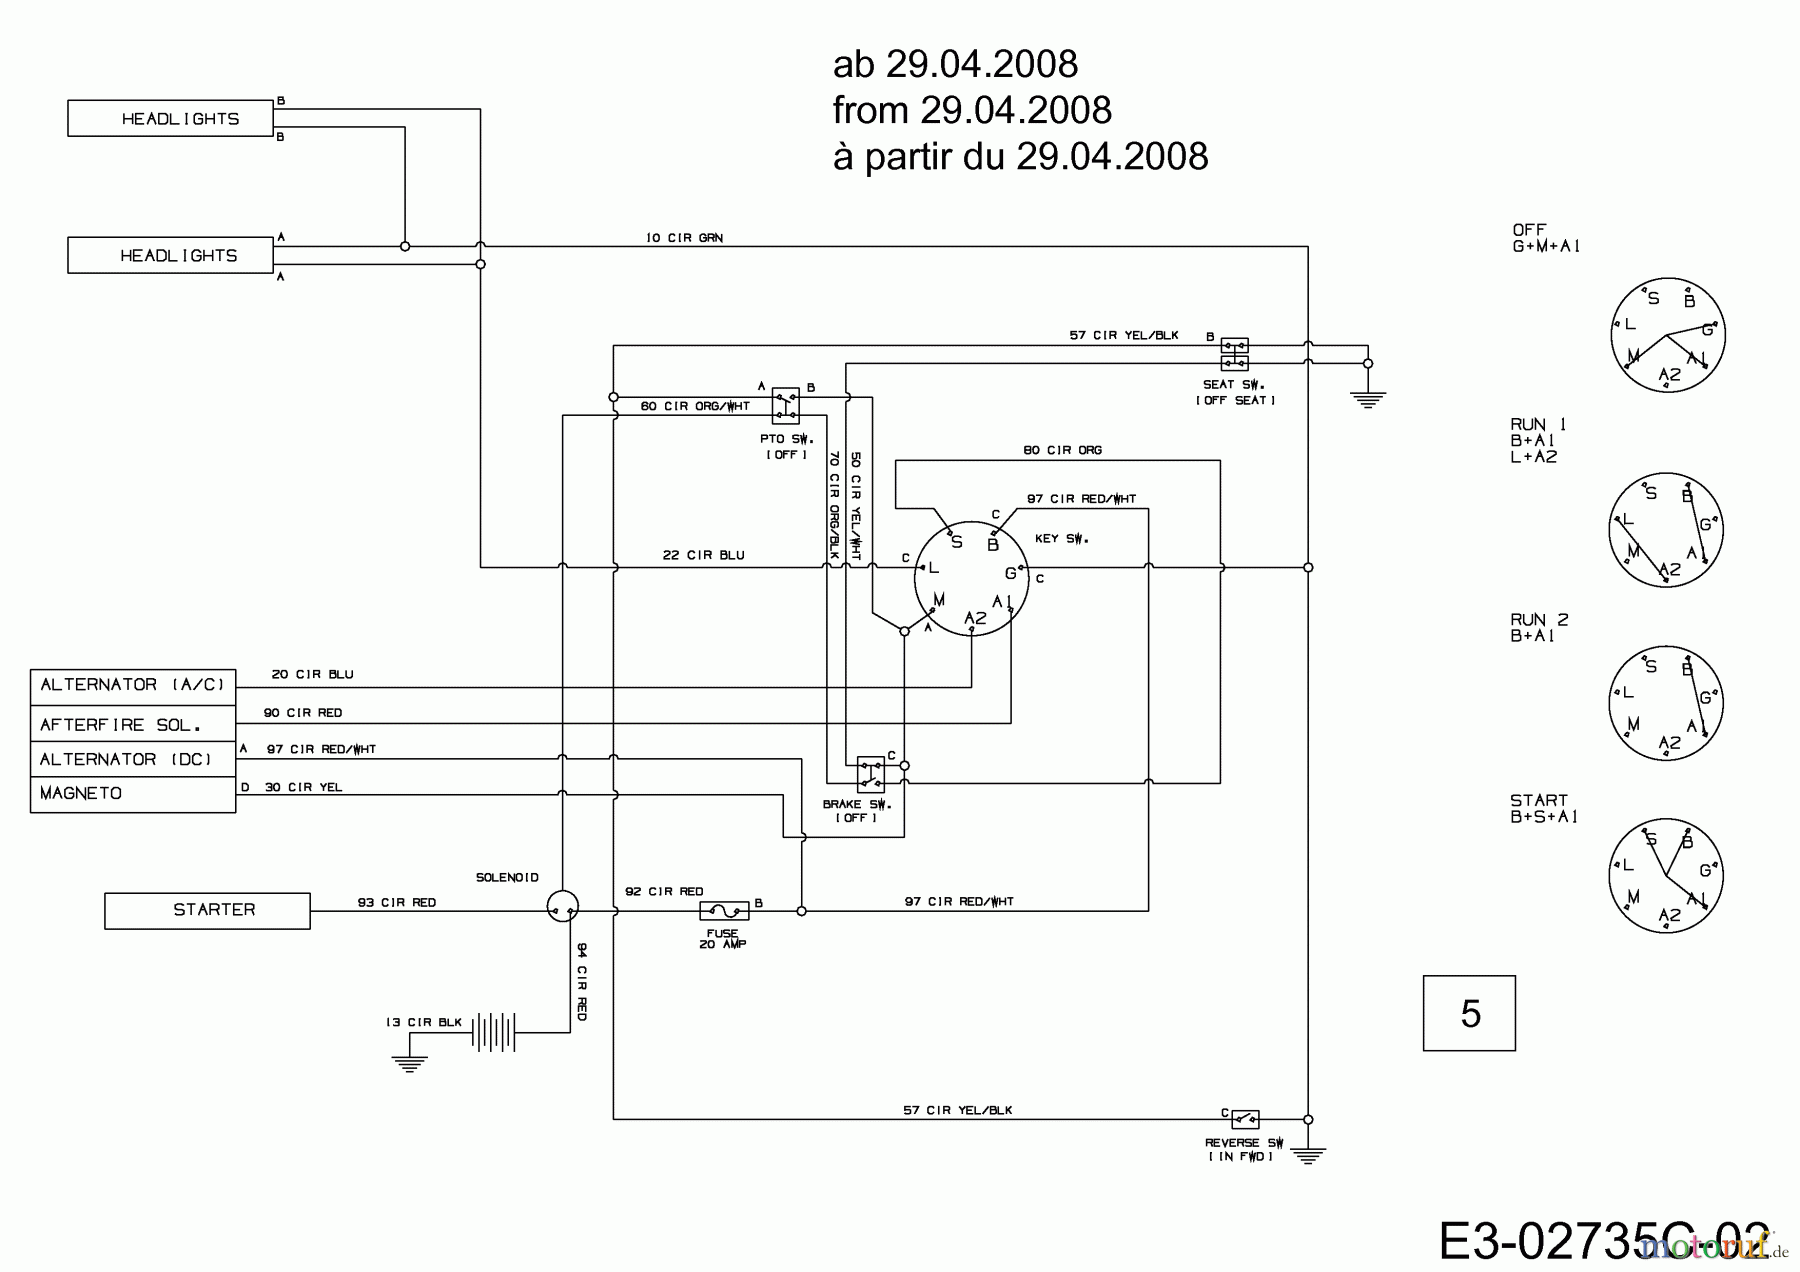  MTD Lawn tractors Platinum SD 20/107 H 13AP793G686  (2008) Wiring diagram from 29.04.2008